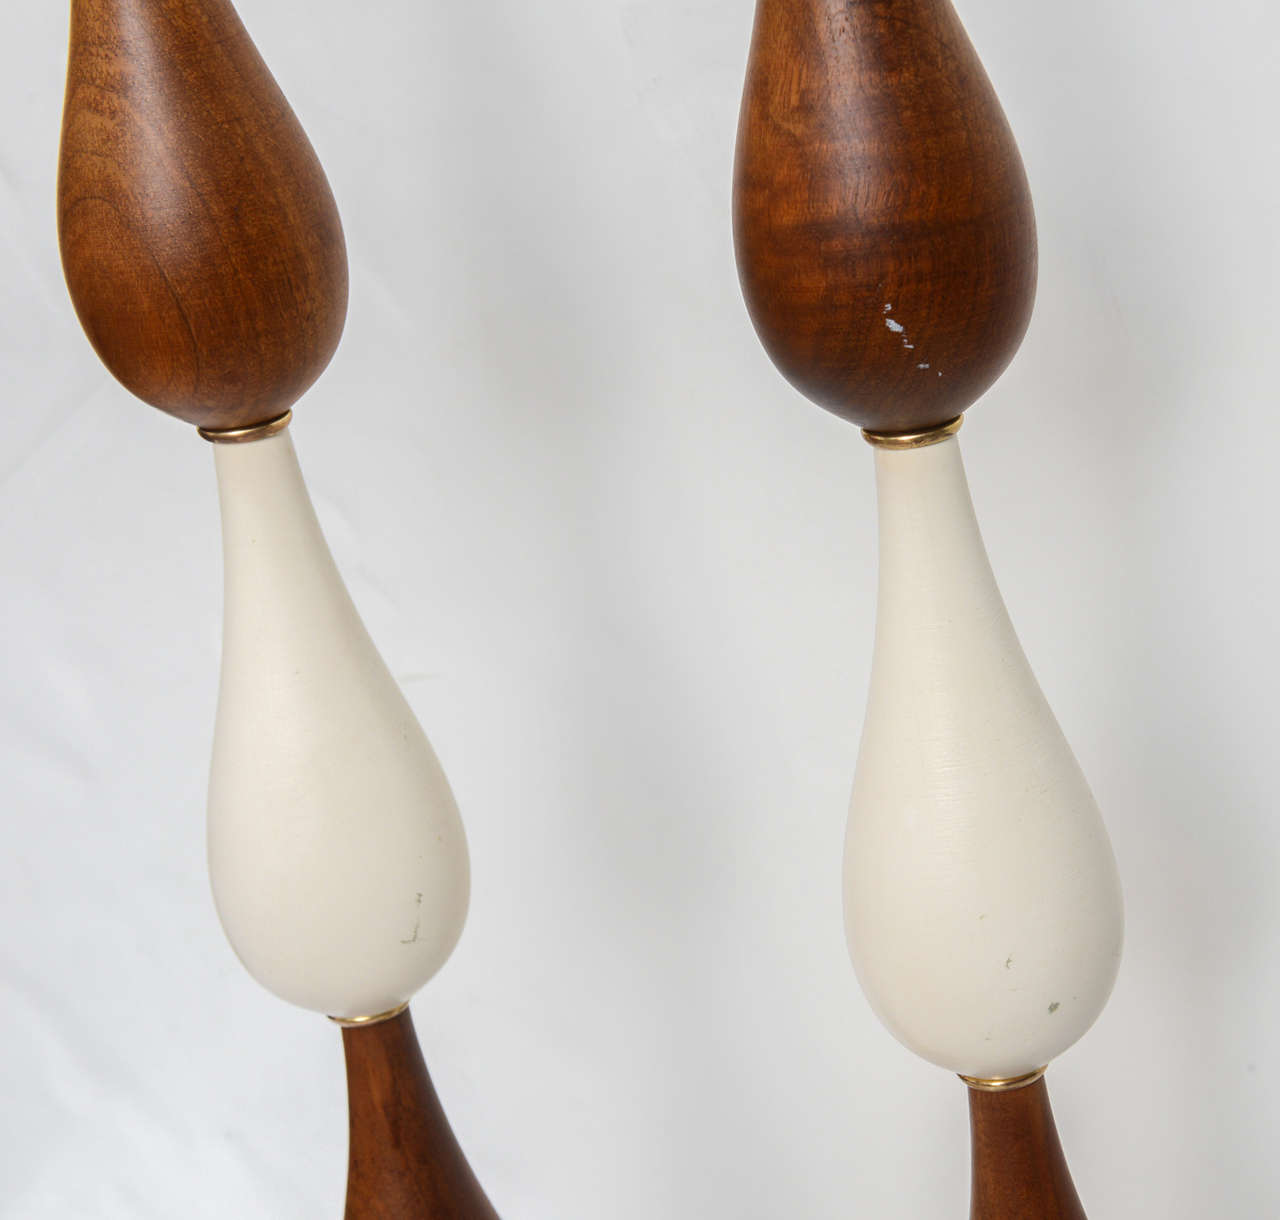 Tall Three Teardrop Form, Teak and Brass Table Lamps by Laurel, 1960s For Sale 1